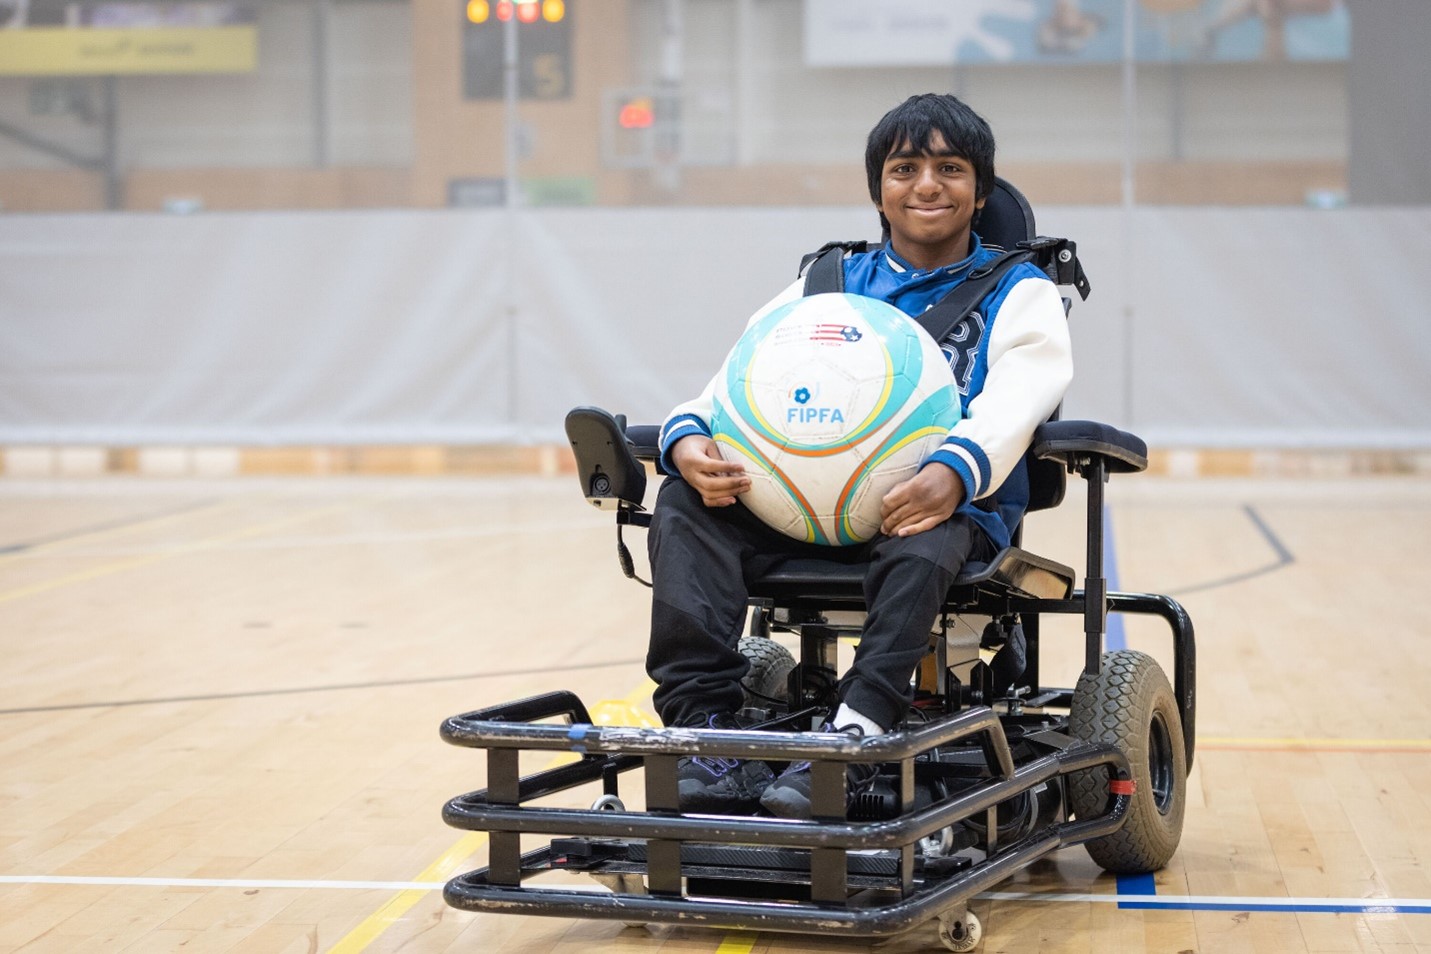 Ashmit on a powerchair football court holding the ball in his lap